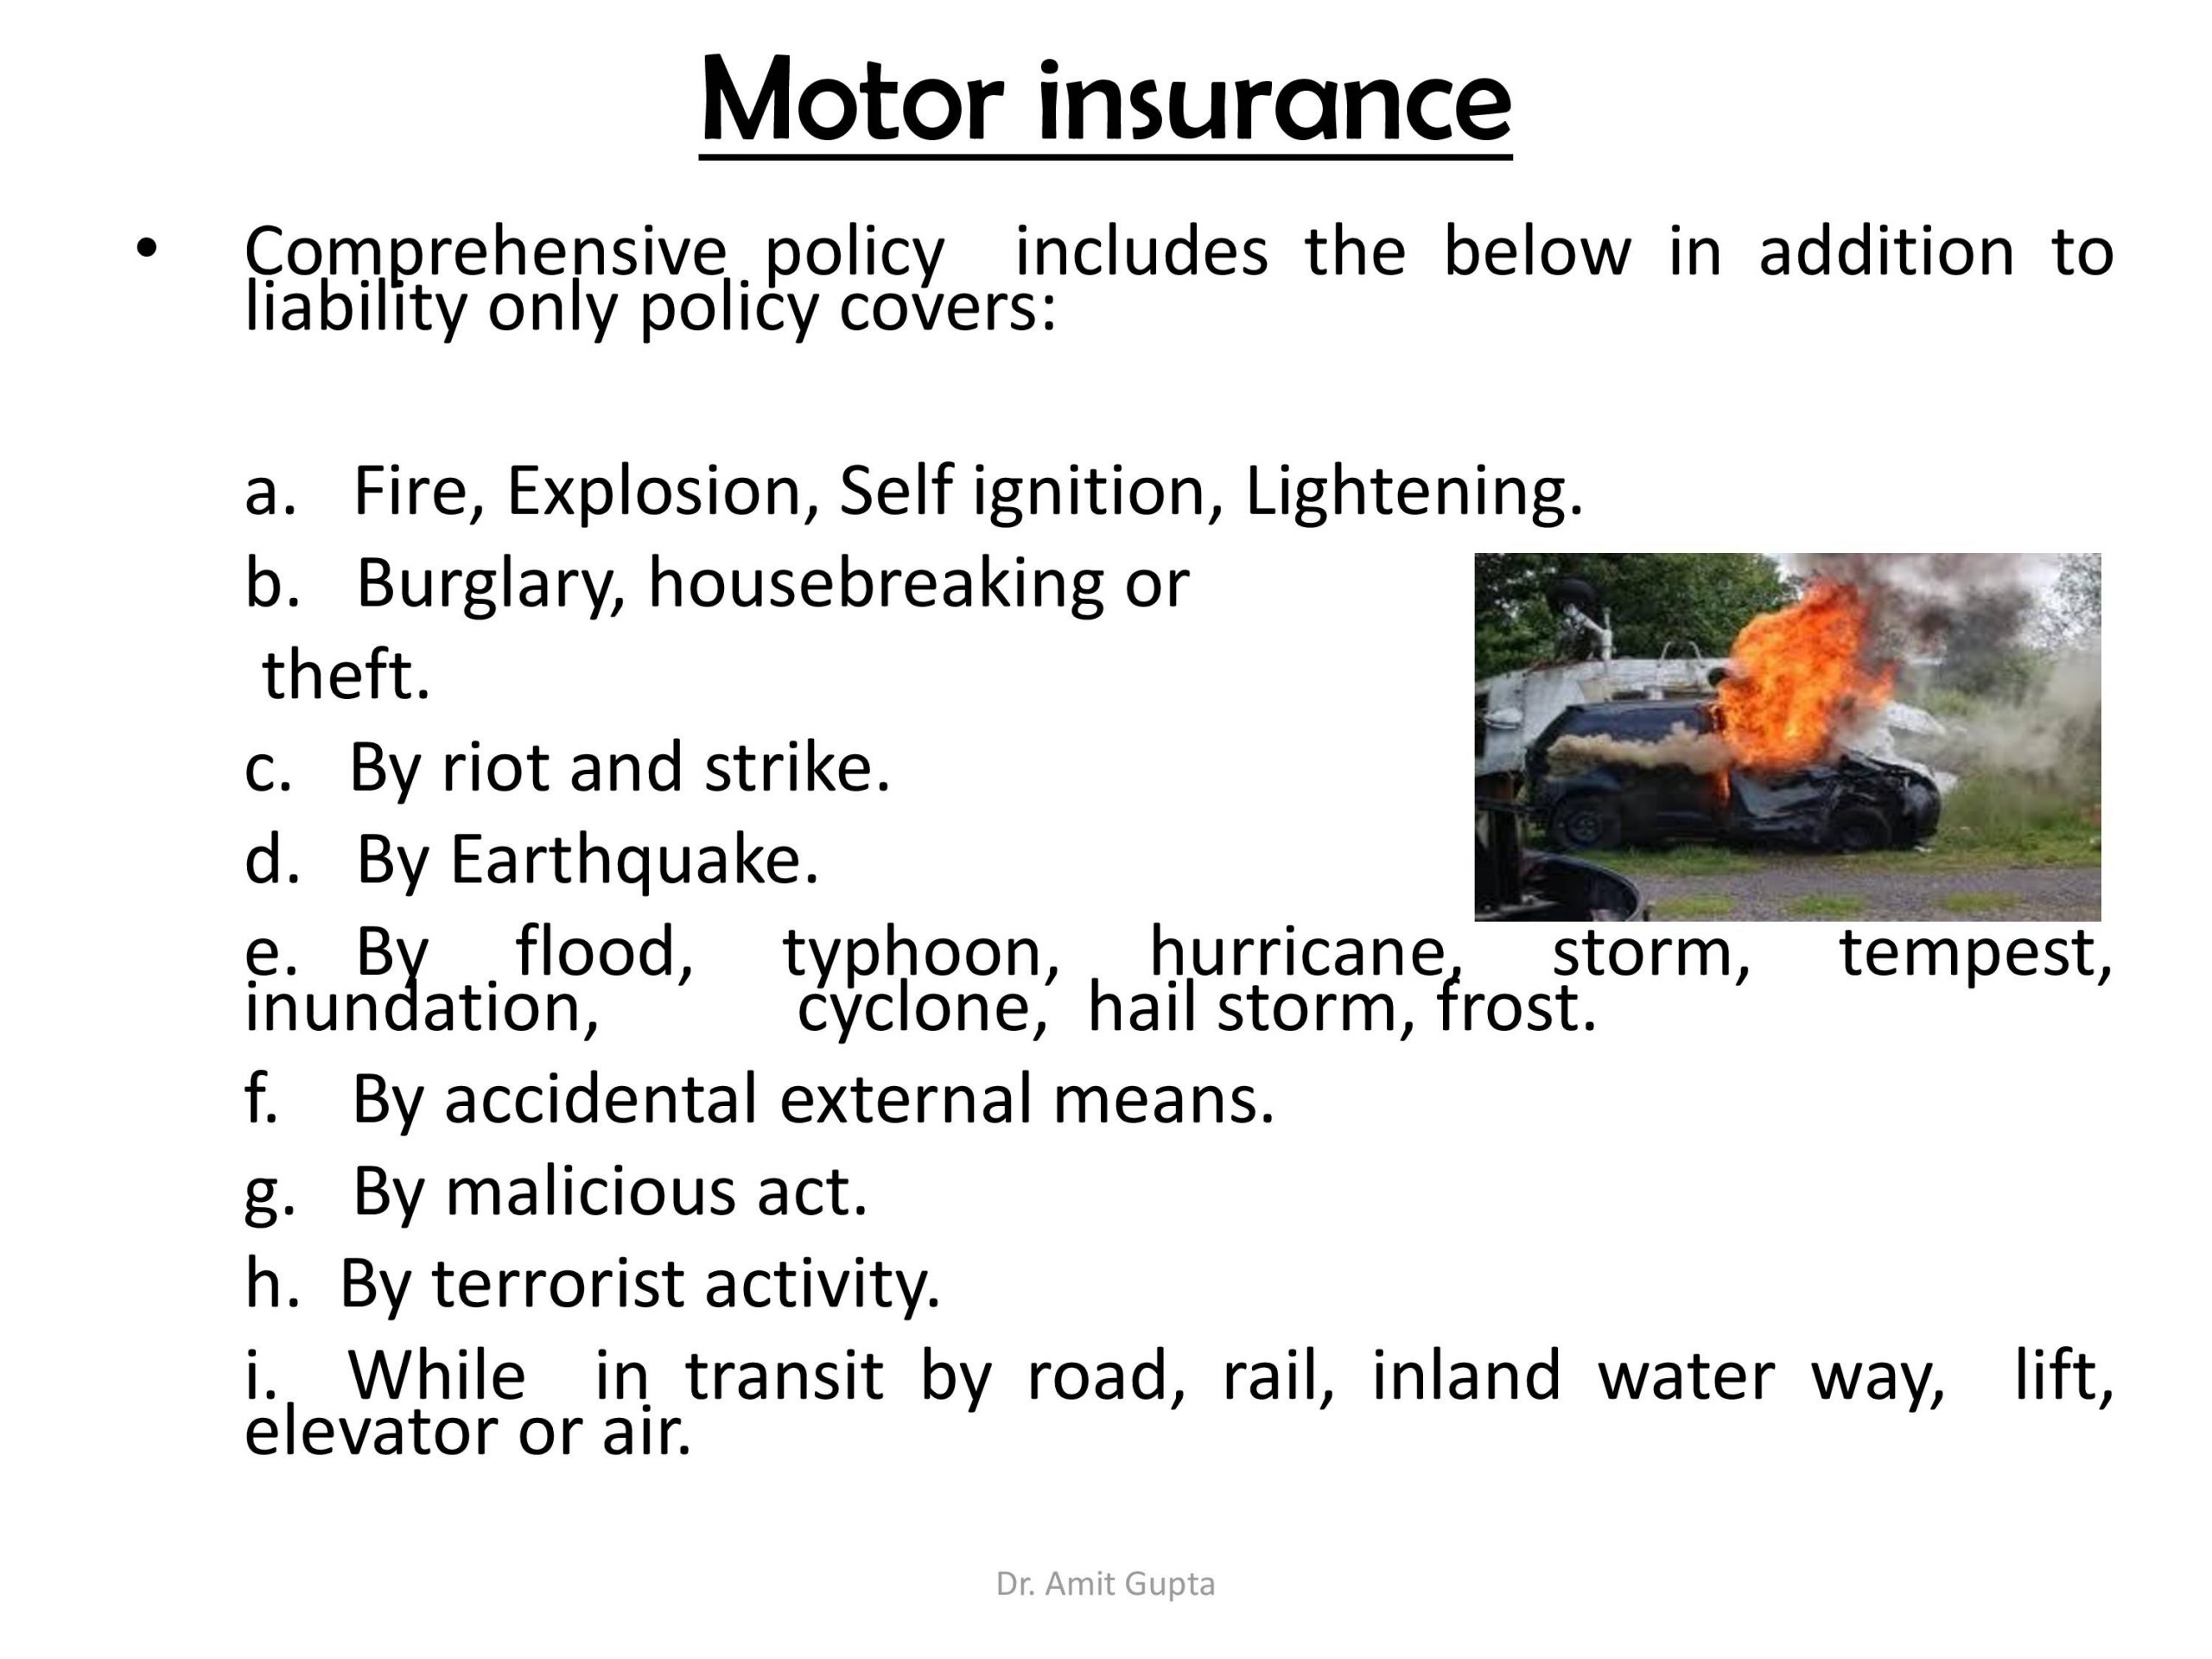 Motor Insurance Powerpoint Slides within measurements 3000 X 2250